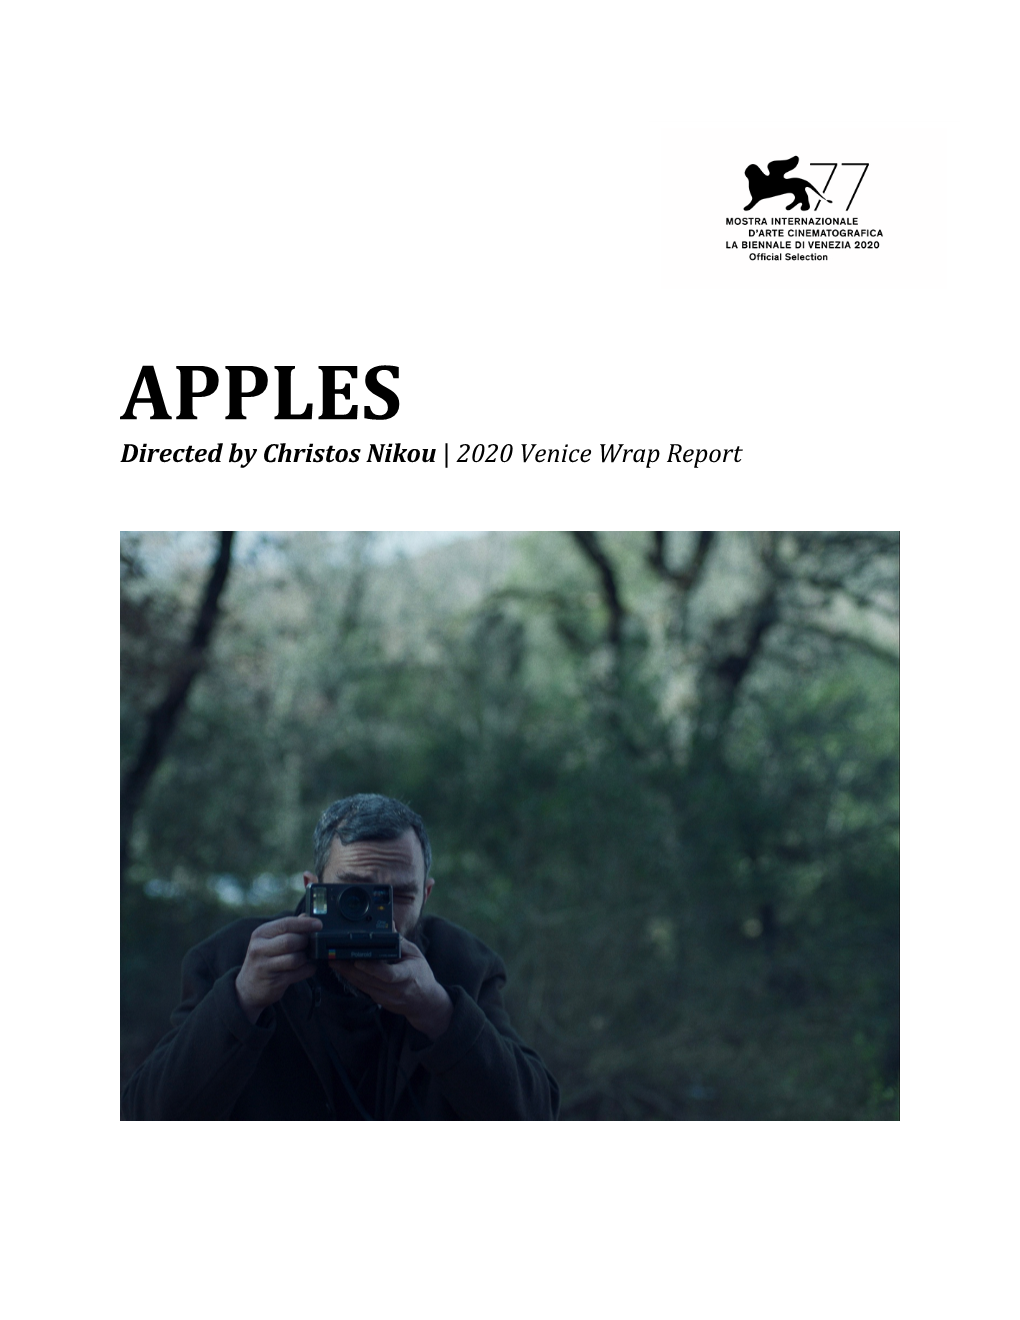 APPLES Directed by Christos Nikou | 2020 Venice Wrap Report